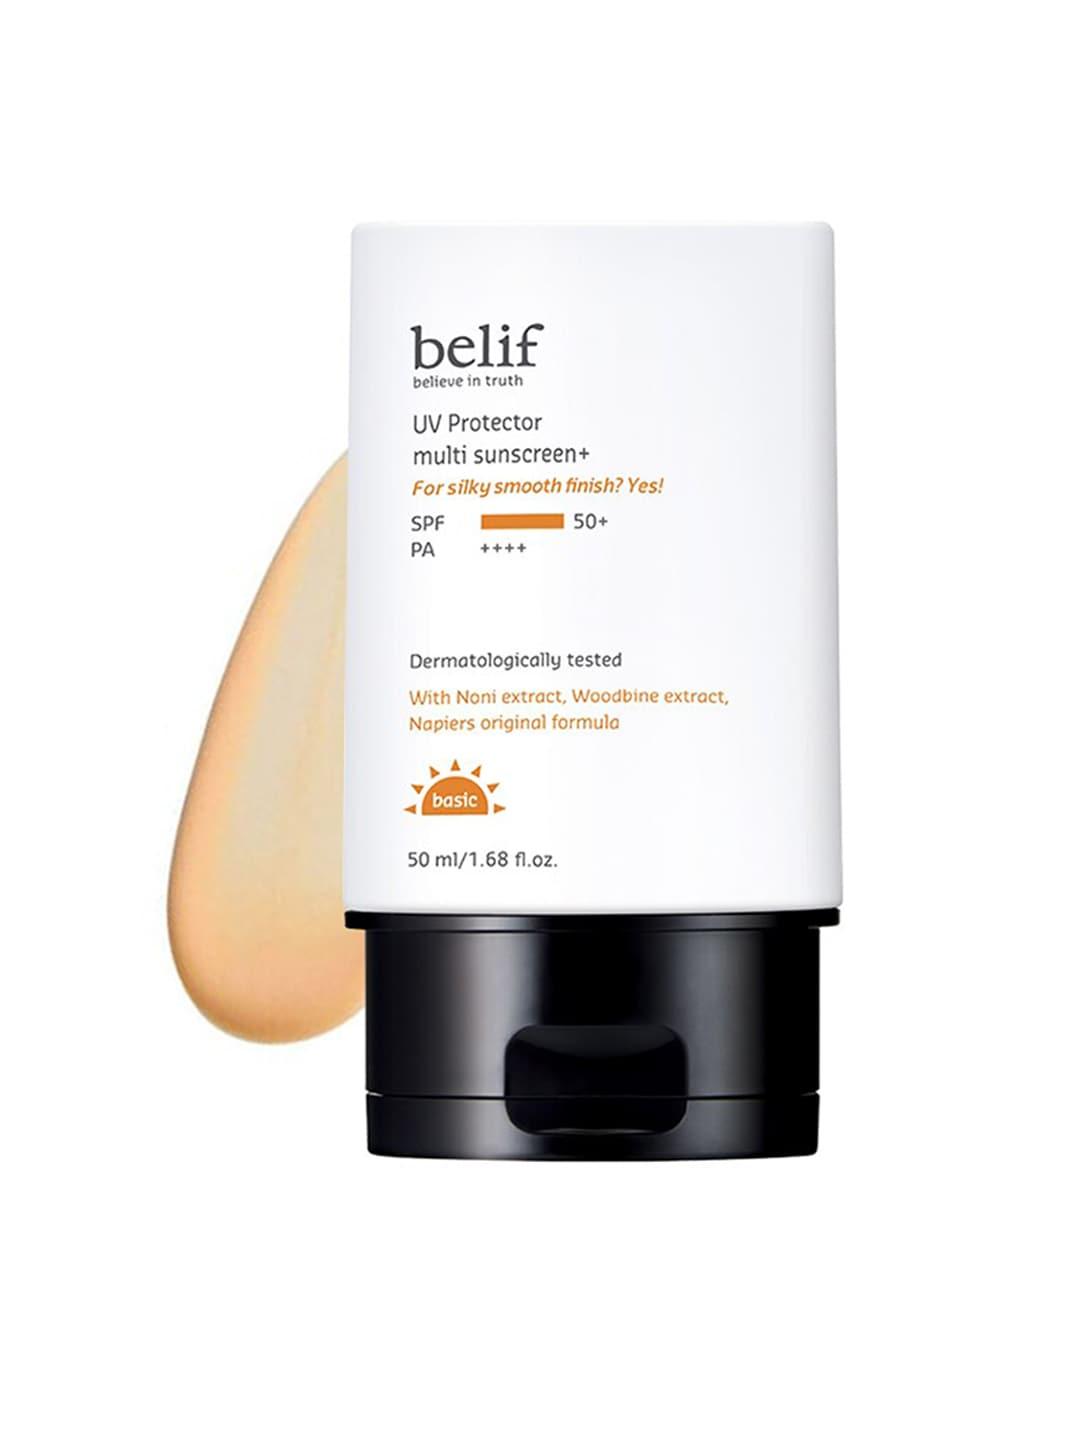 belif UV Protector Multi Sunscreen -  SPF50+ PA++++ With Noni & Woodbine Extract 50 ml